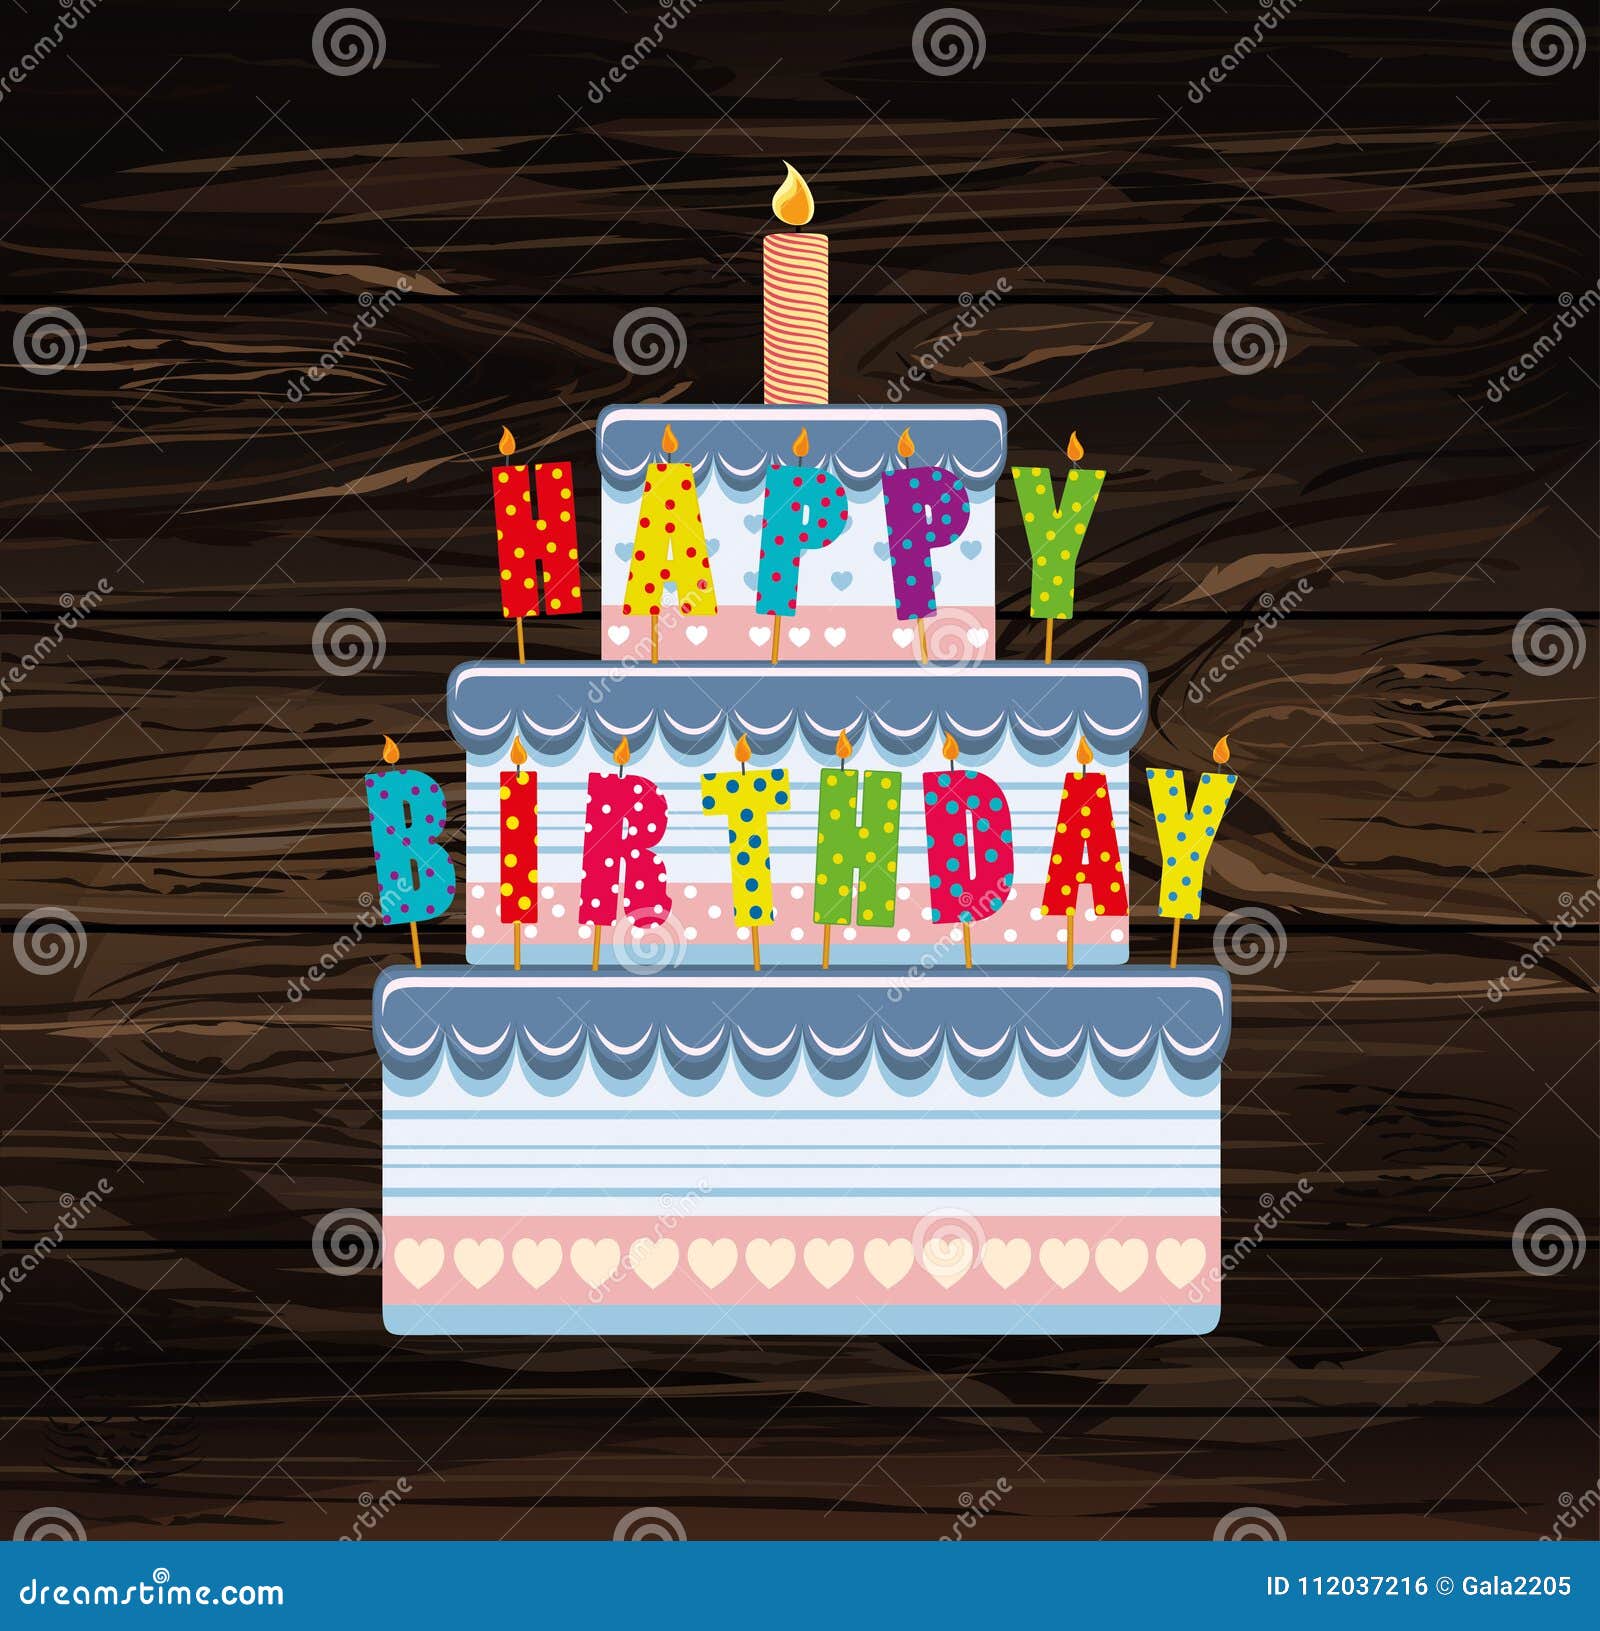 Festive Big Cake.Letters Happy Birthday. Greeting Card or Invitation for a  Holiday Stock Vector - Illustration of birthday, cupcake: 112037216